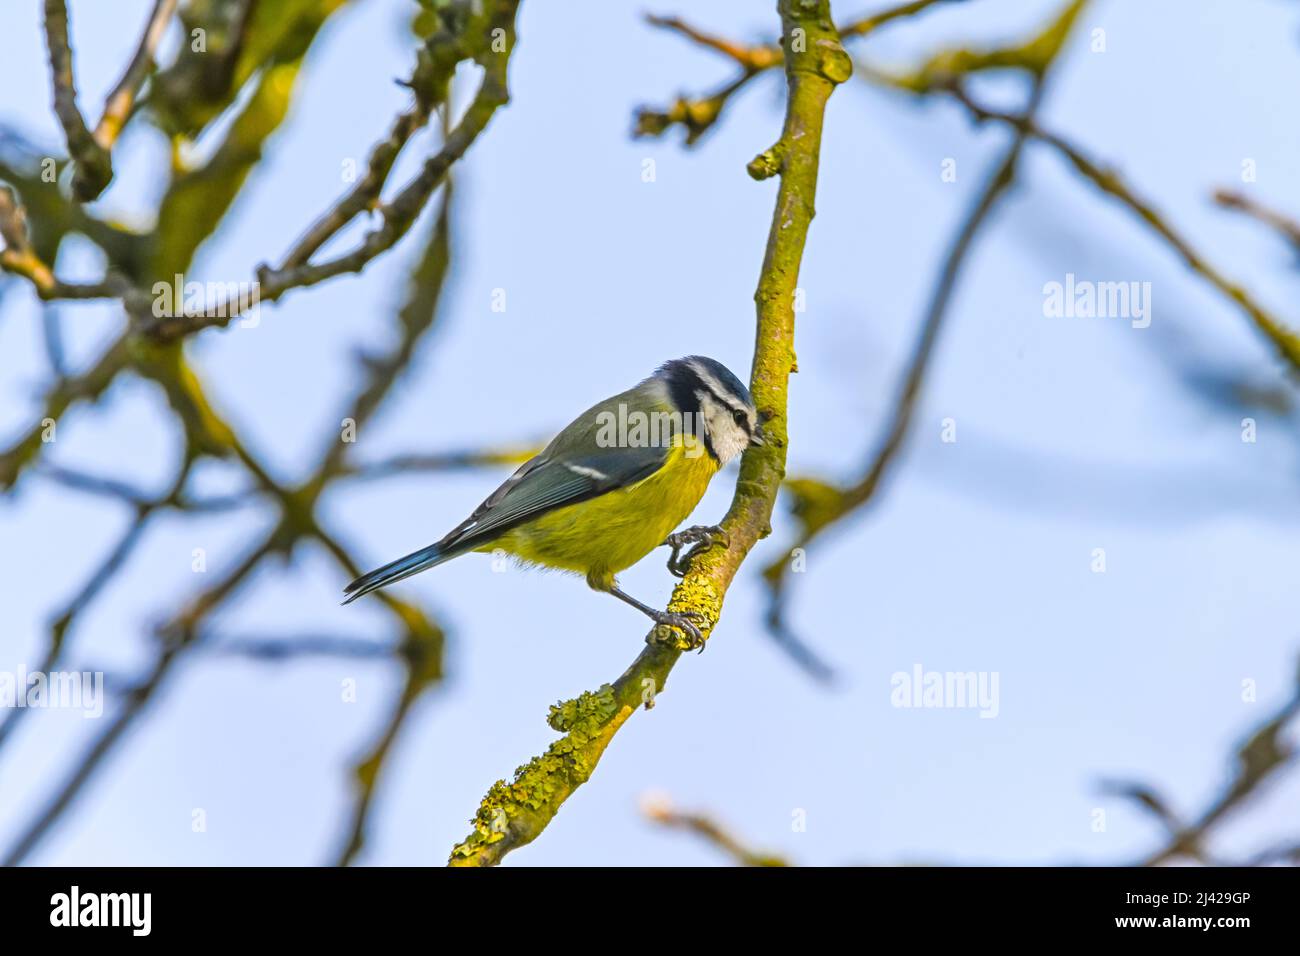 A Eurasian Blue Tit, Cyanistes Caeruleaus sitting on a branch of an old Apple Tree, Malus domestica Stock Photo